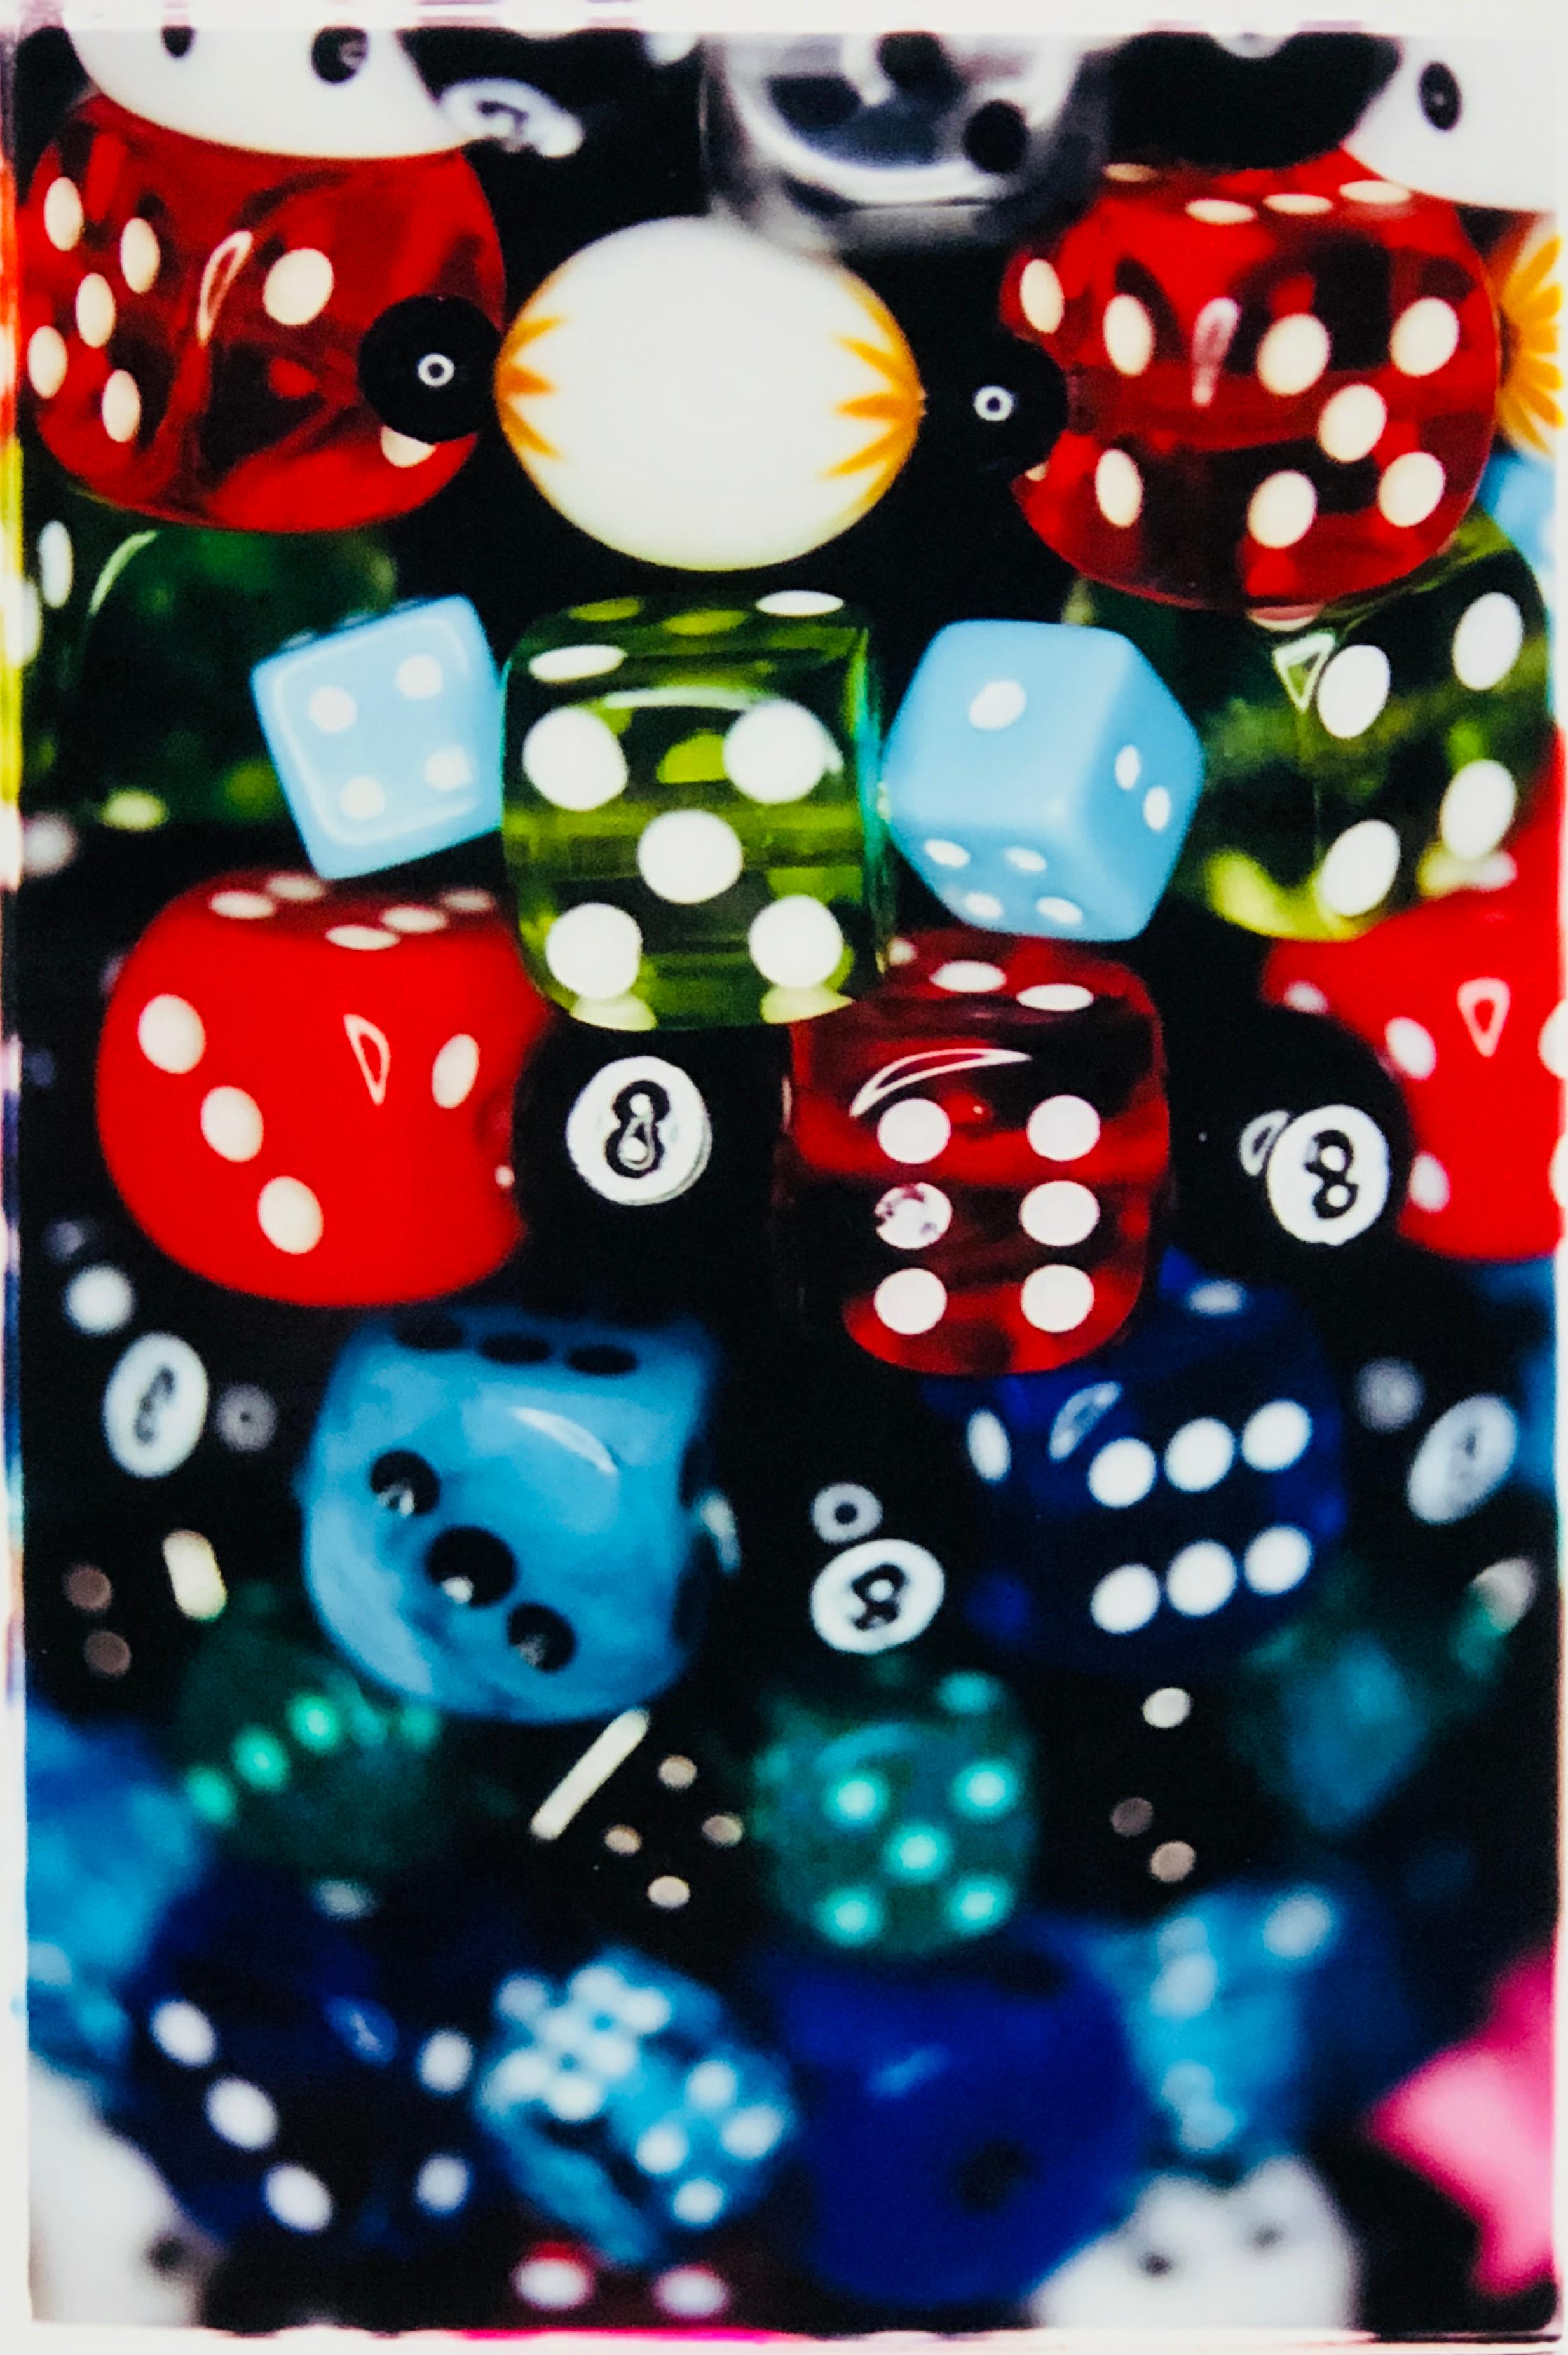 Richard Heeps Color Photograph - Dice I, Hemsby, Norfolk - Pop art contemporary color photography